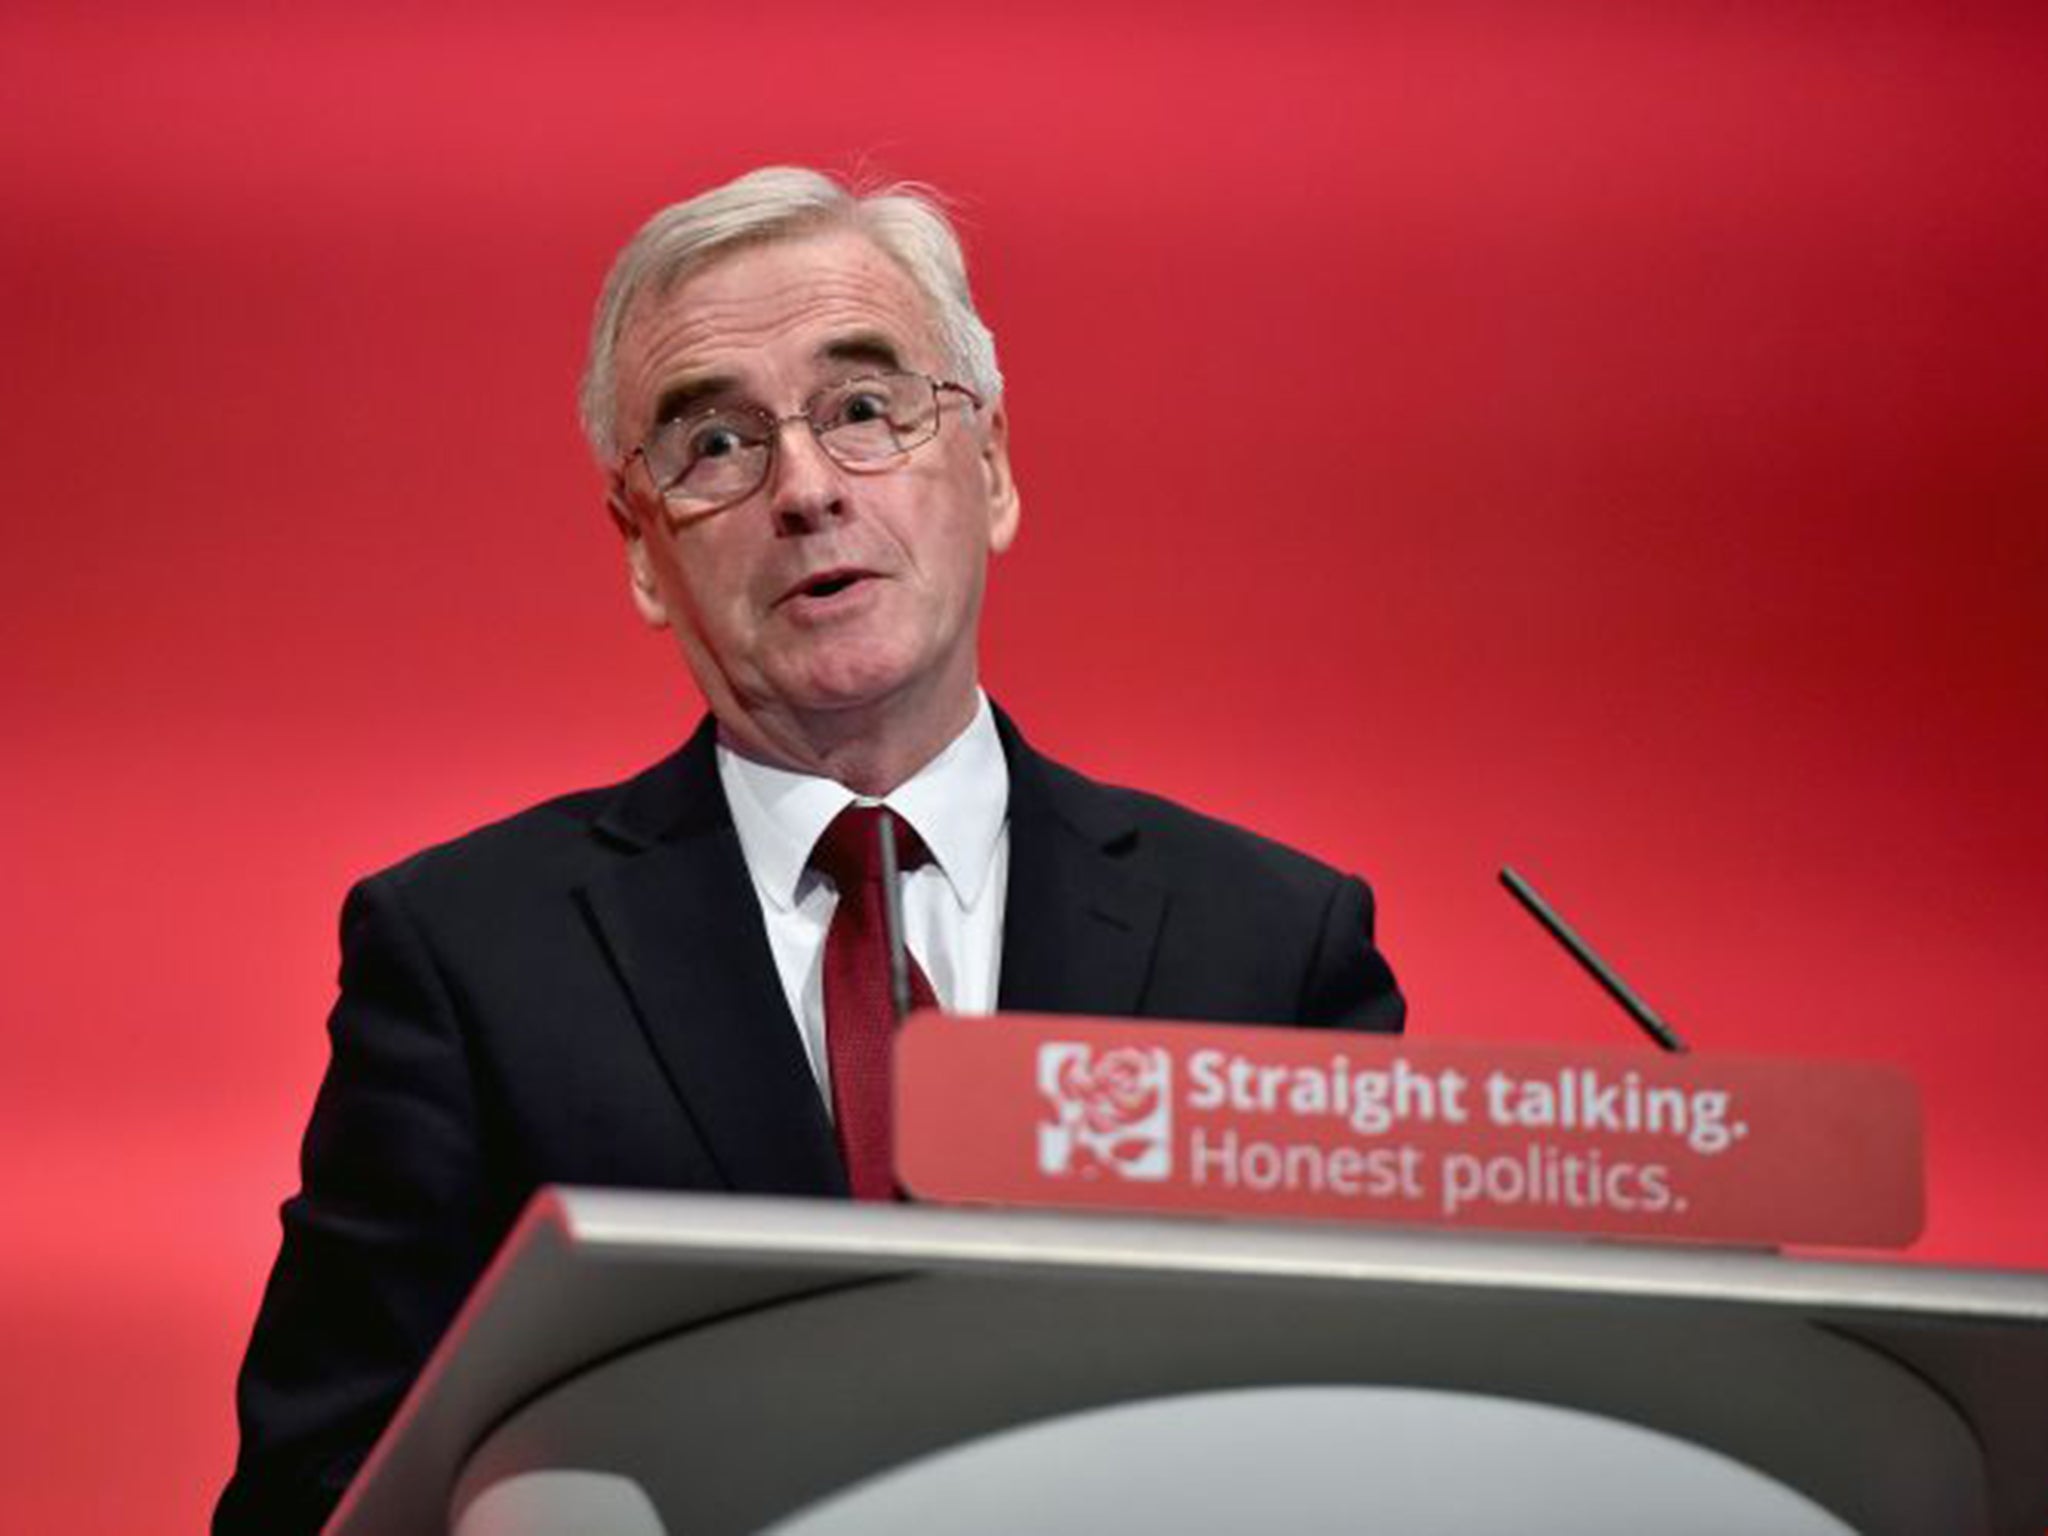 In his first speech as shadow Chancellor, John McDonnell backed “fairer, more progressive” taxes and heavy investment in industry and building projects as a route to tackling the budget deficit